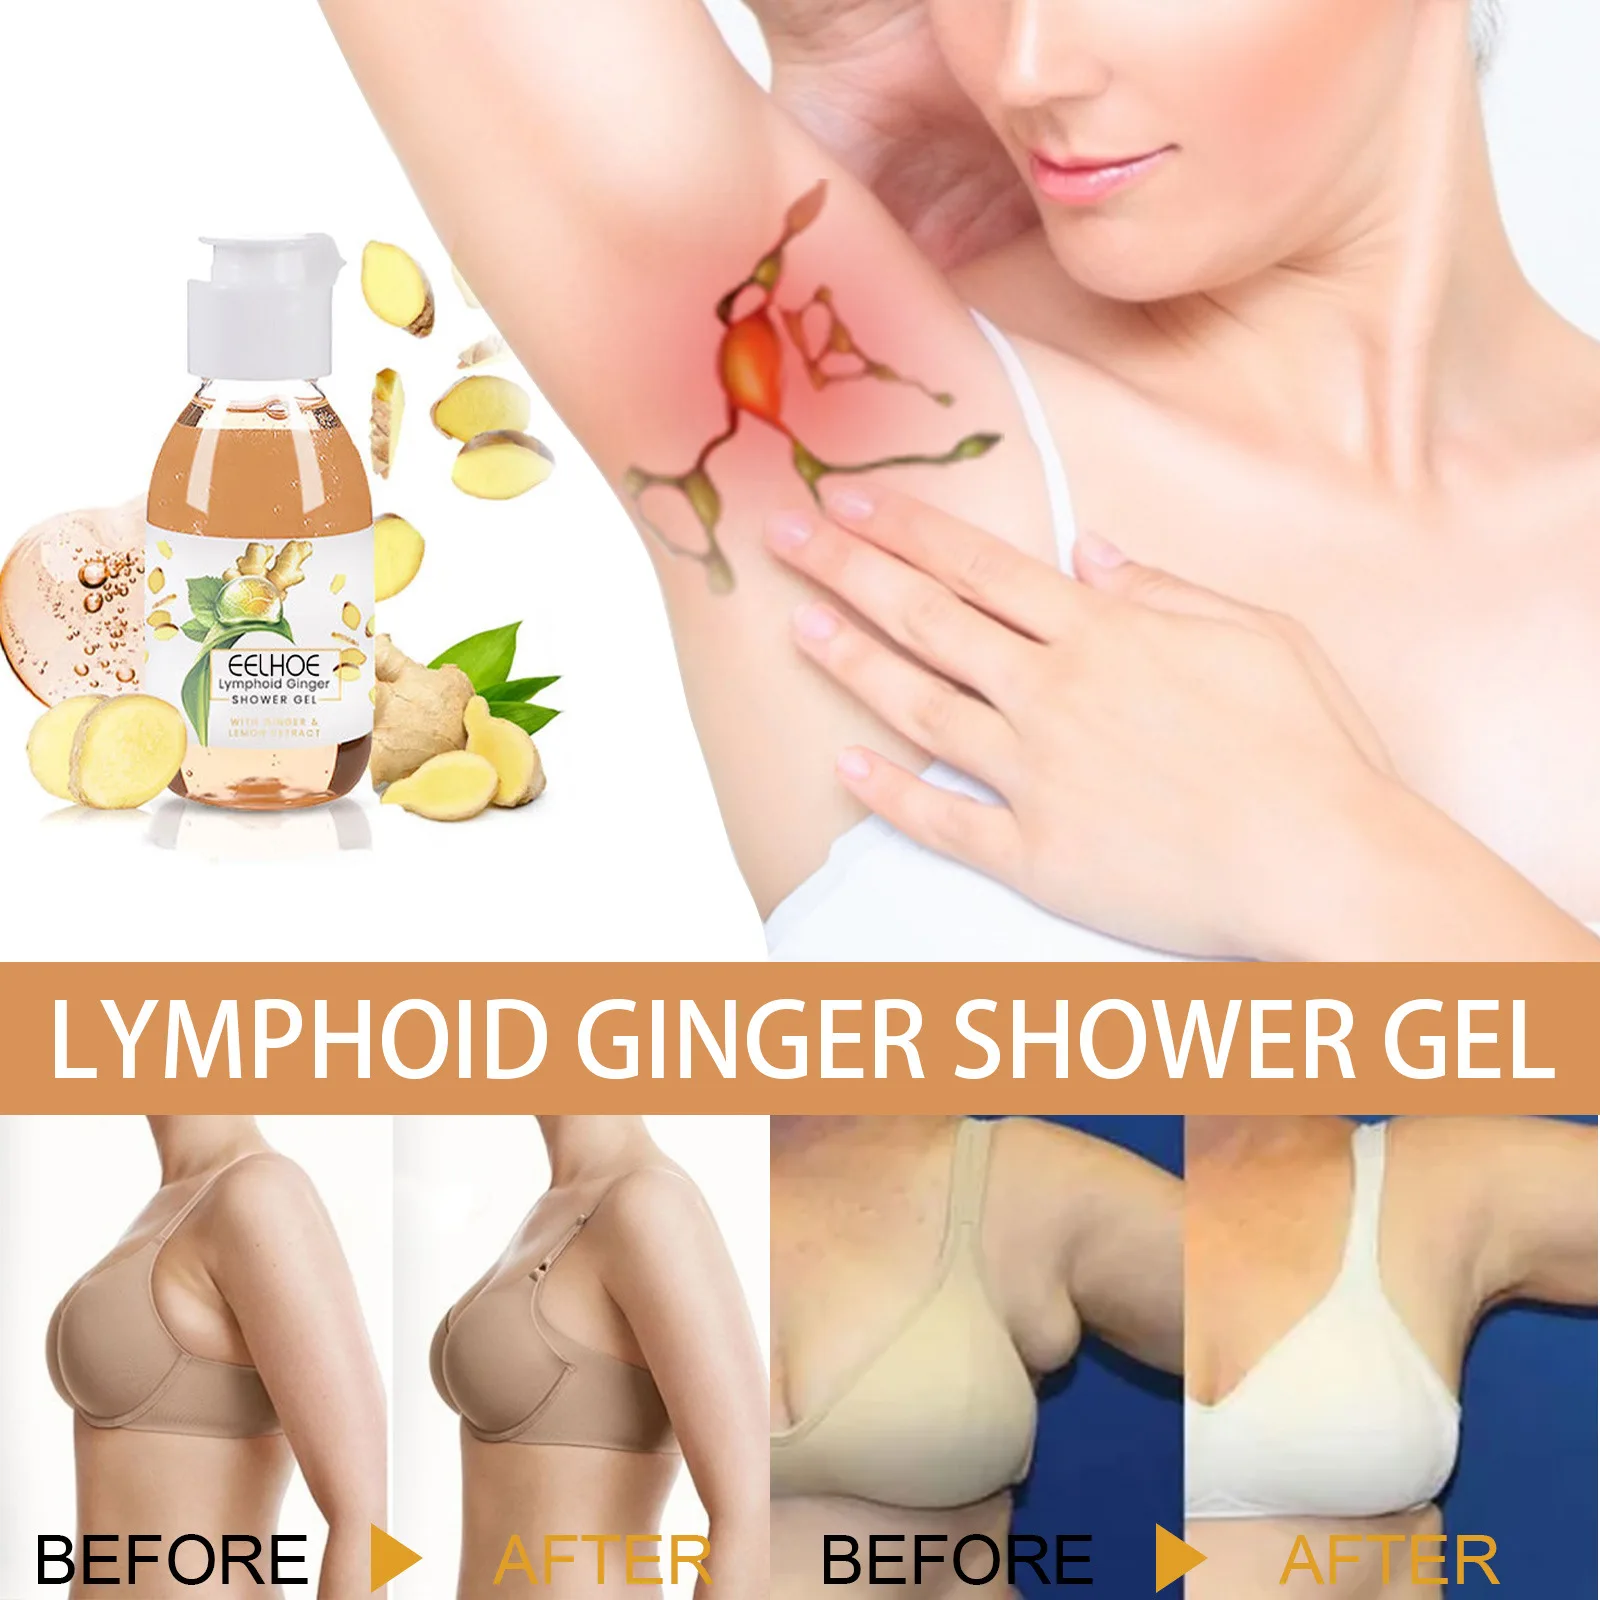 

Slimming Losing Weight Cellulite Natural Organic Remover Lymphatic Drainage Herbal Shower Gel Beauty Health Firm Body Care 50ml